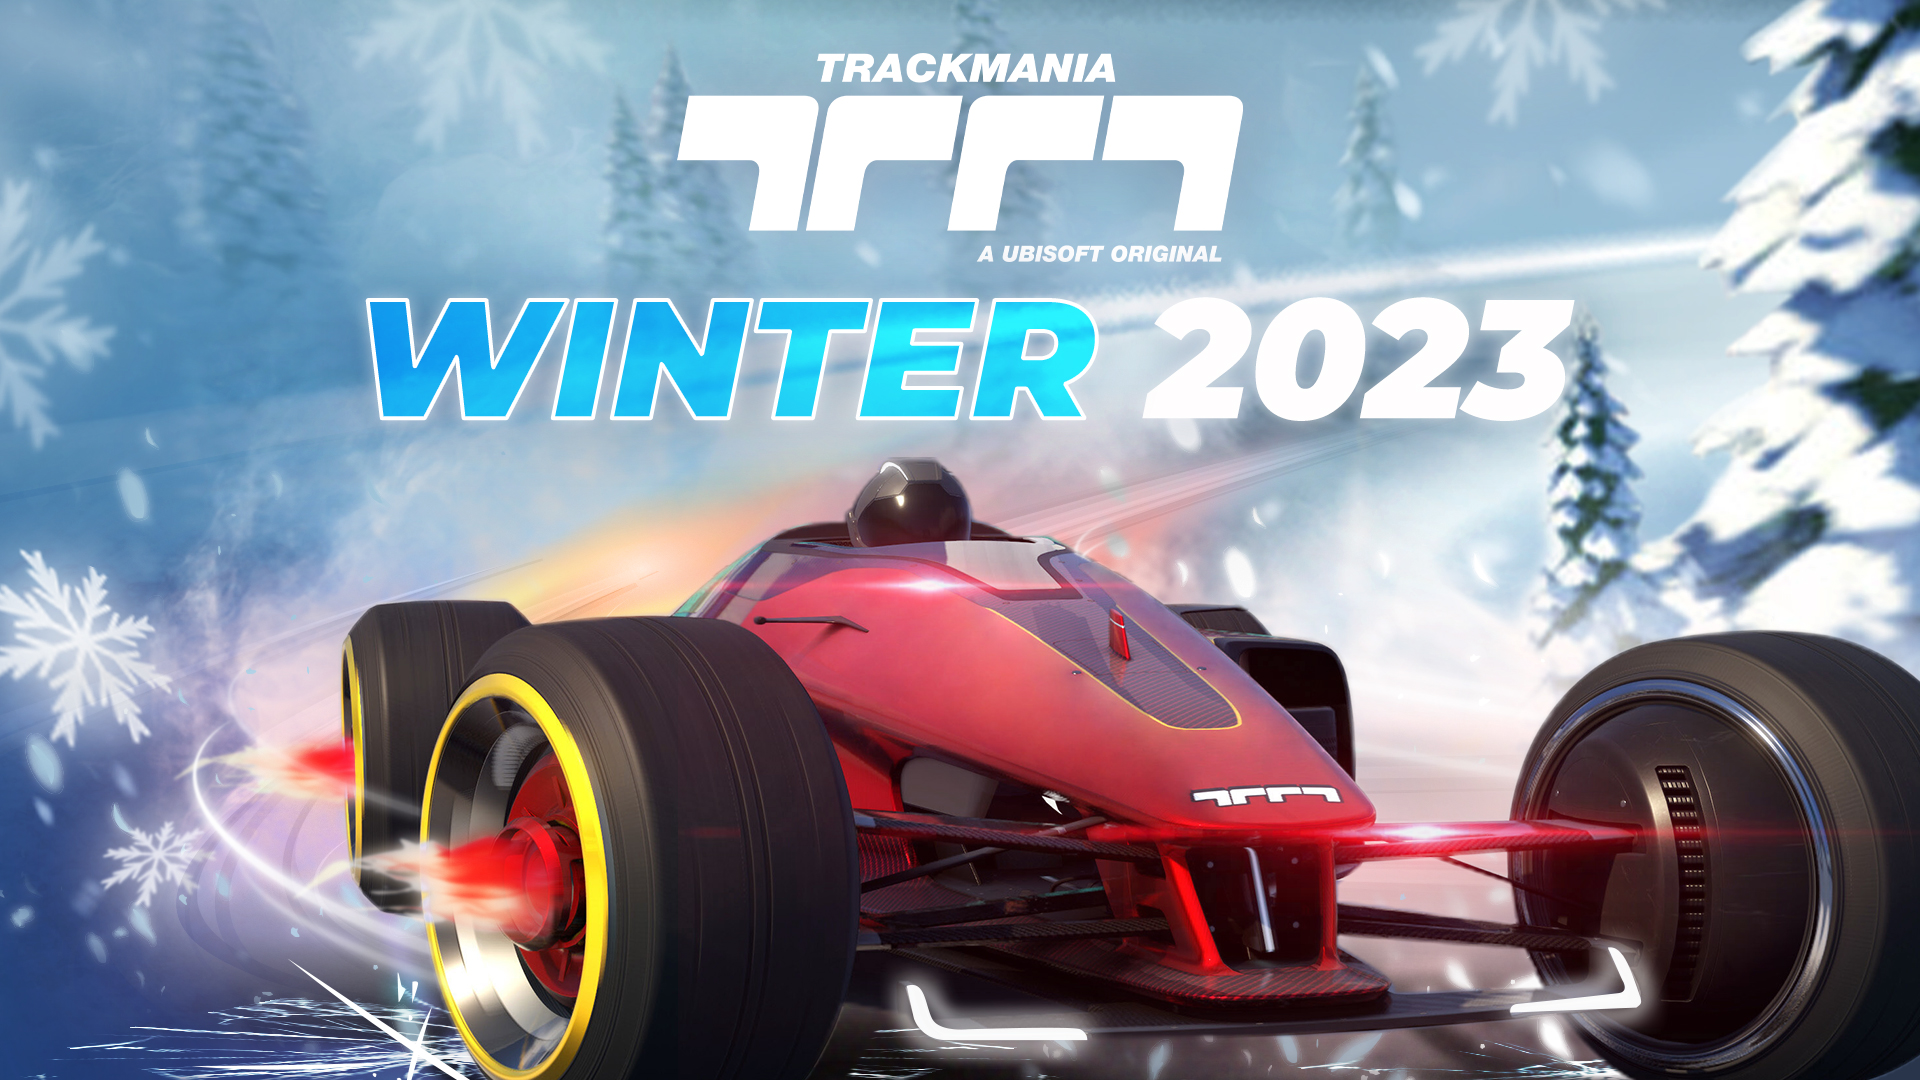 The Winter 2023 campaign is out!